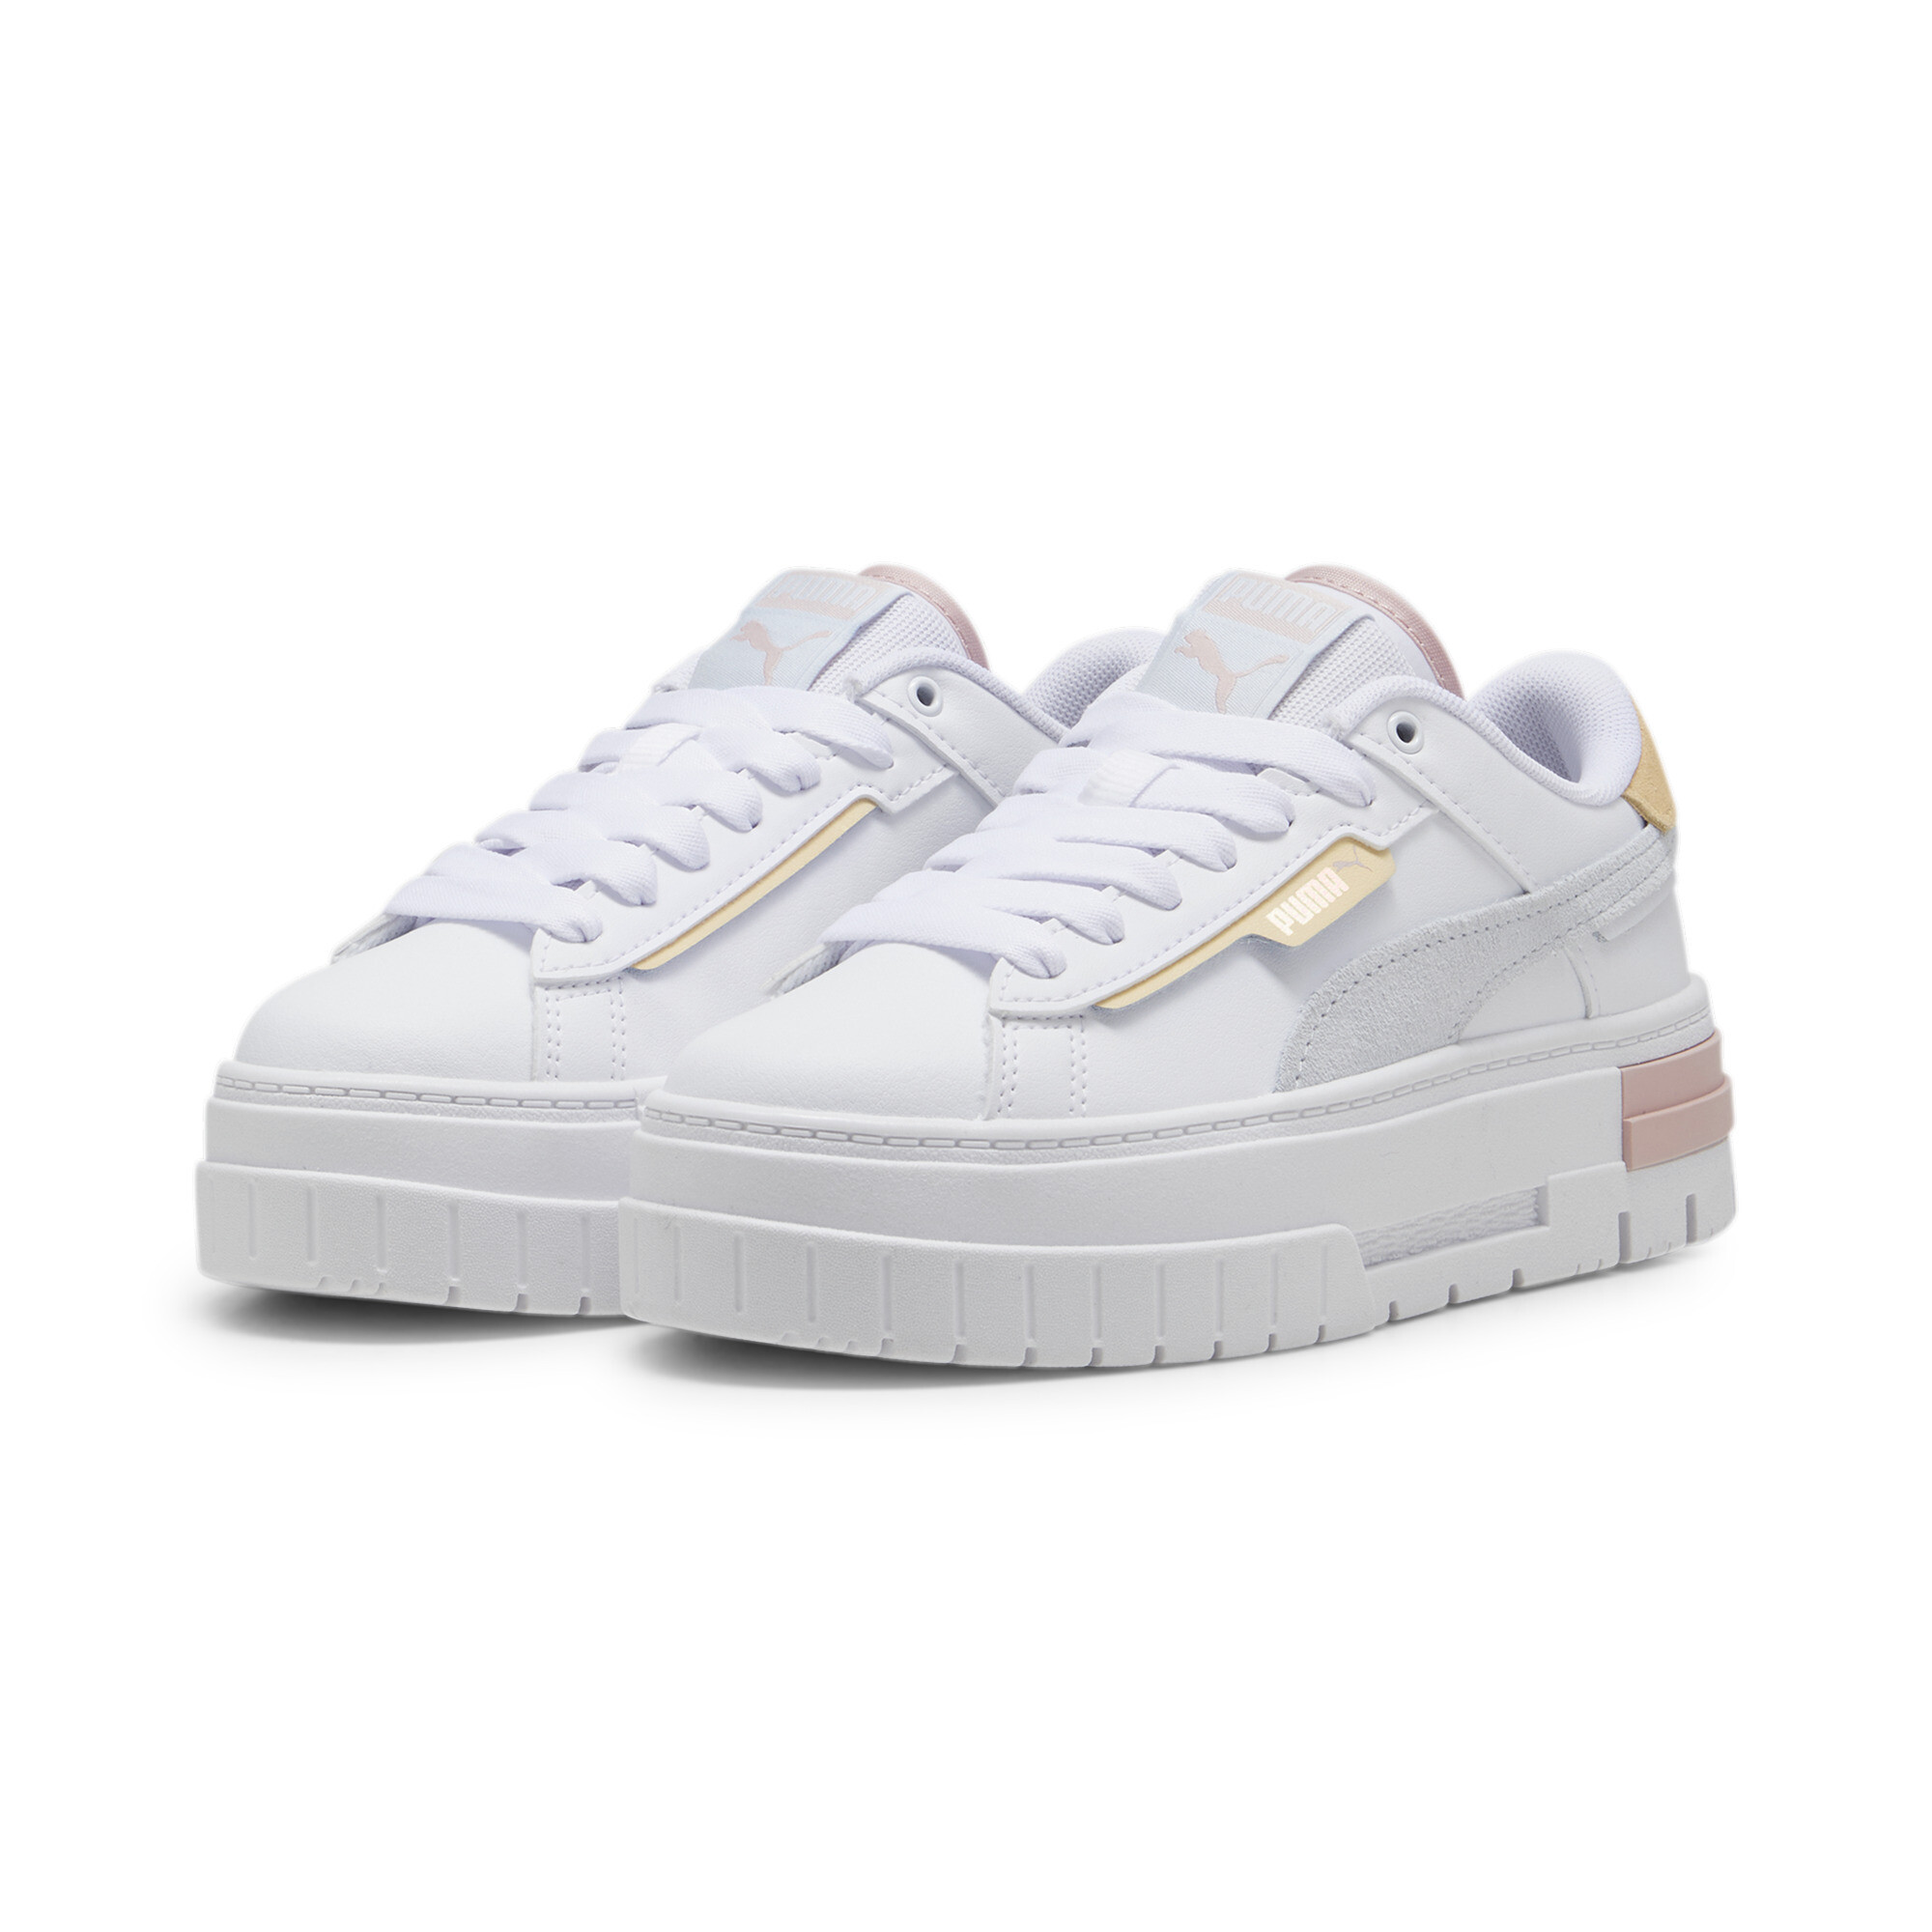 Women's Puma Mayze Crashed Youth Sneakers, White, Size 37, Shoes